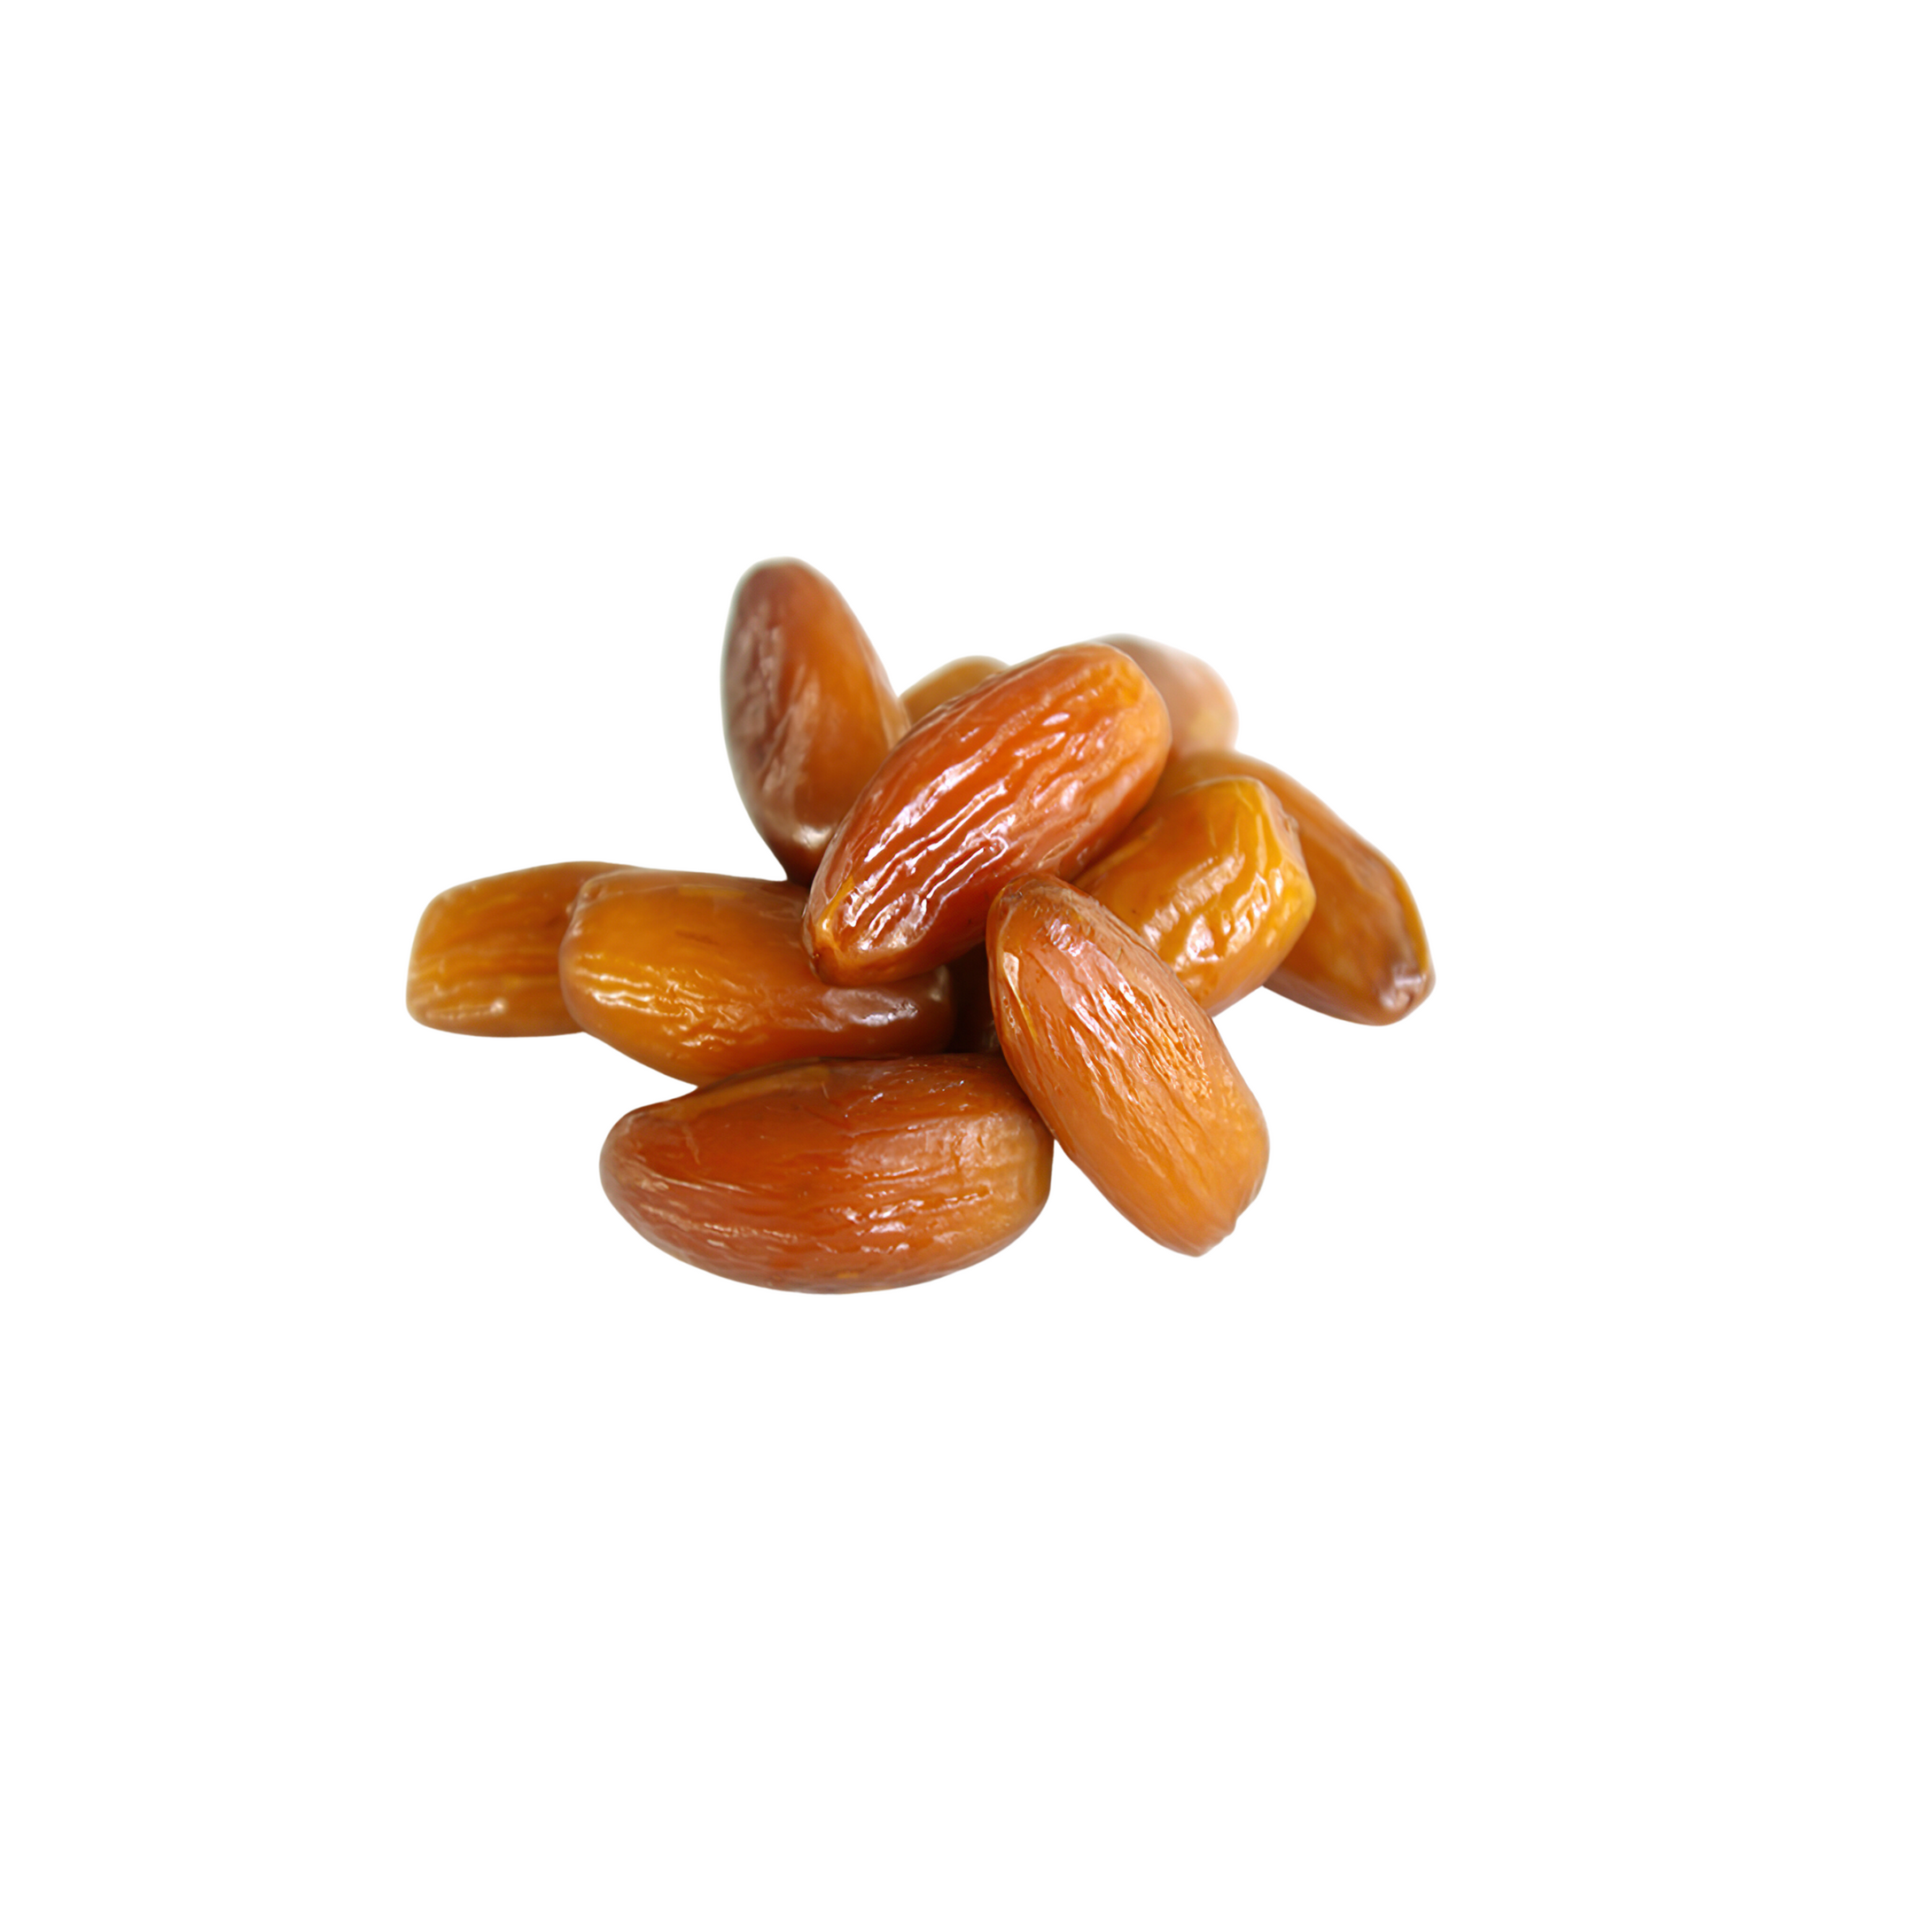 Dates - Pitted Deglet